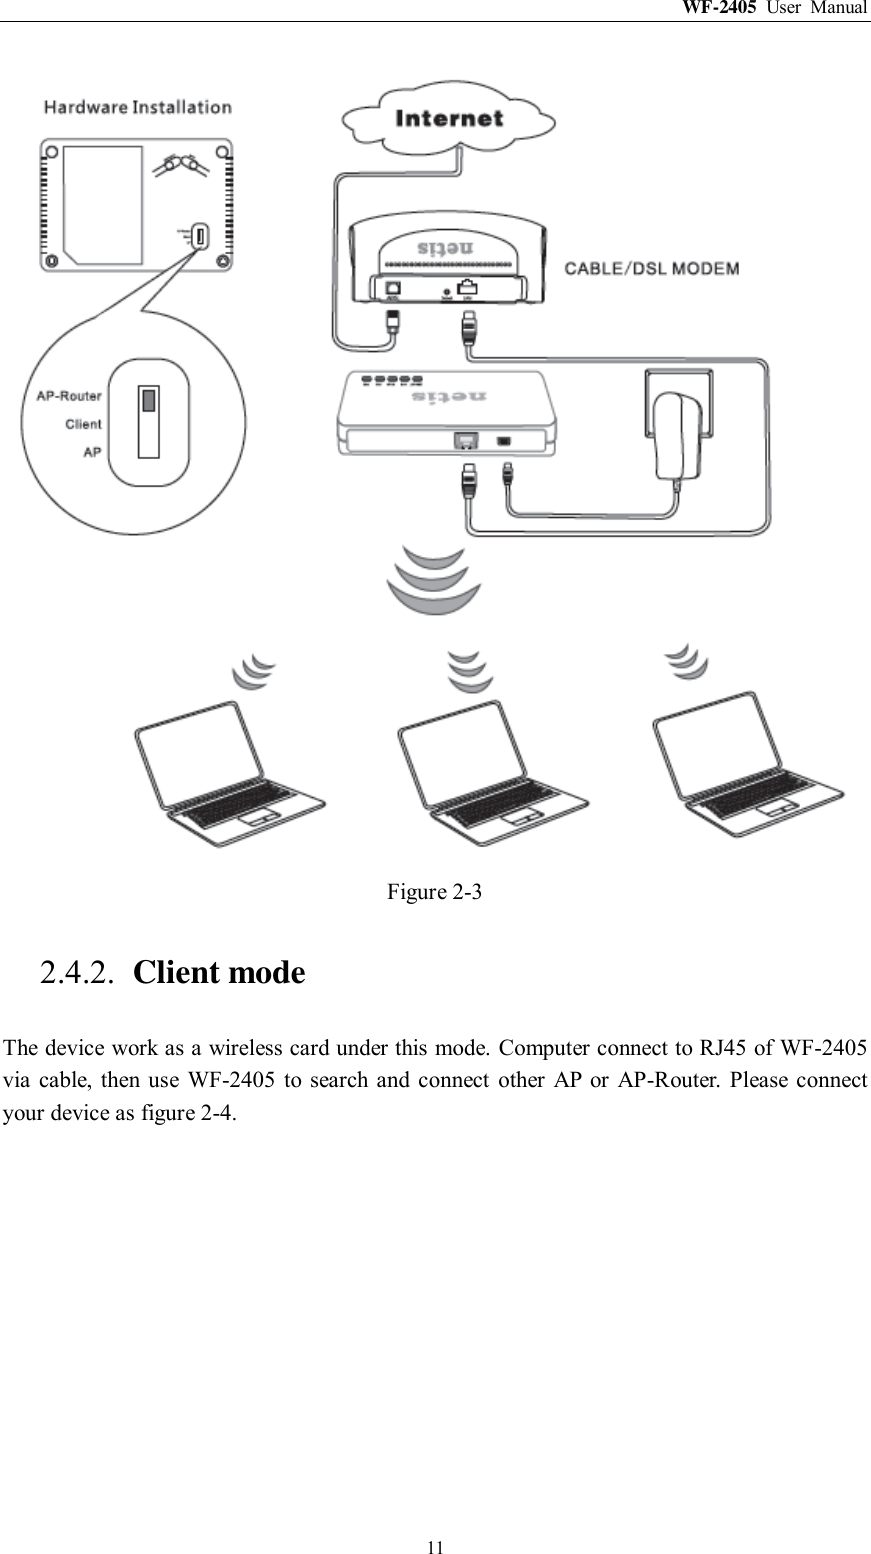 WF-2405  User  Manual  11  Figure 2-3 2.4.2. Client mode The device work as a wireless card under this mode. Computer connect to RJ45 of WF-2405 via  cable,  then use  WF-2405  to search and  connect  other  AP or  AP-Router.  Please connect your device as figure 2-4. 